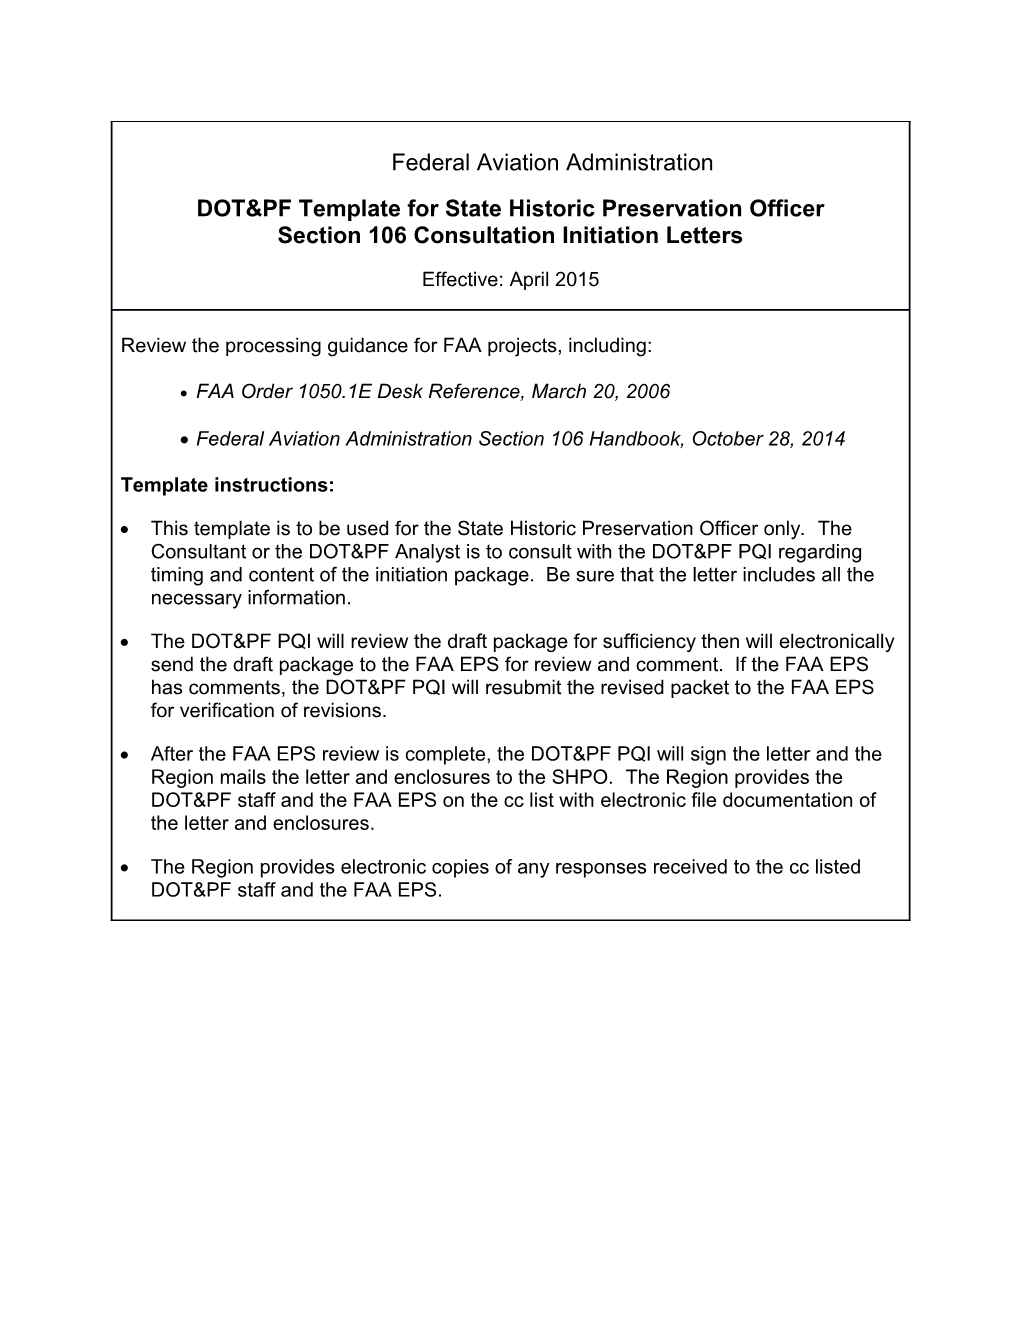 DOT&PF Template for State Historic Preservation Officer